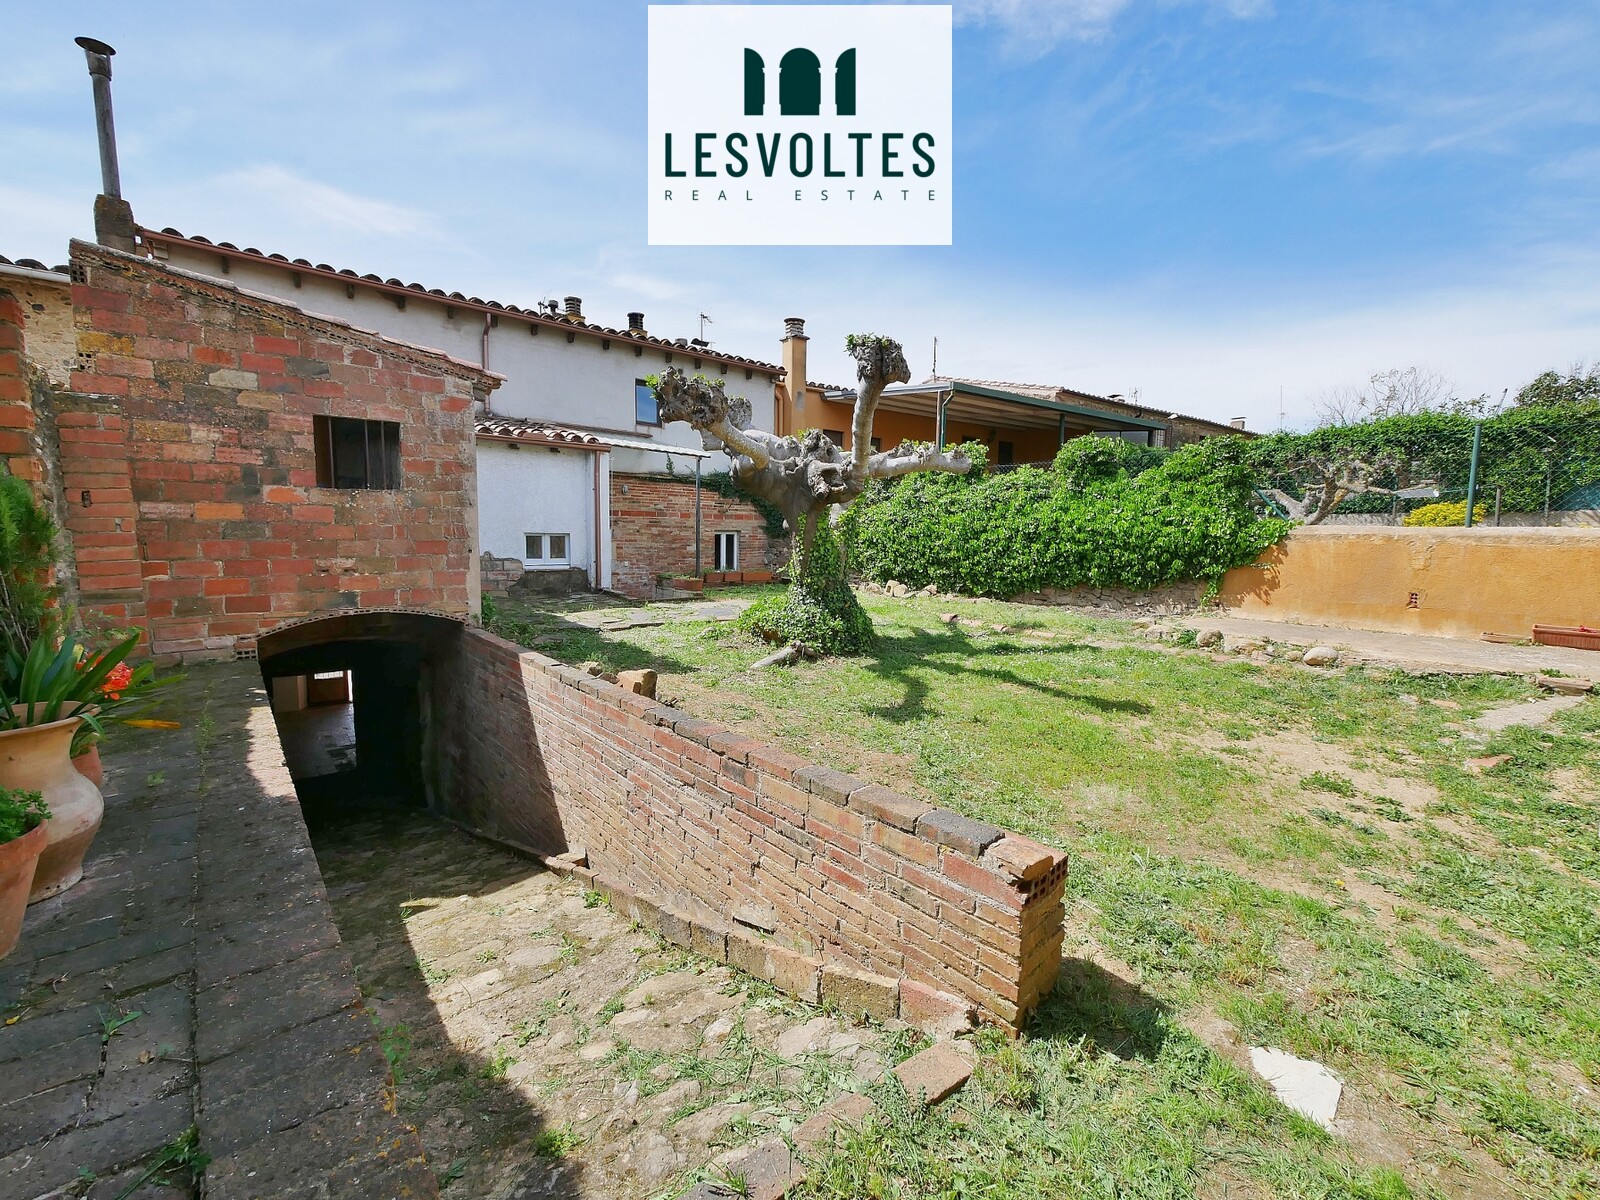 OLD VILLAGE HOUSE OF 256 M2 FULLY LIVABLE, WITH GARDEN OF 120 M2 AND GARAGE, FOR SALE IN THE OLD TOWN OF CORÇÀ.